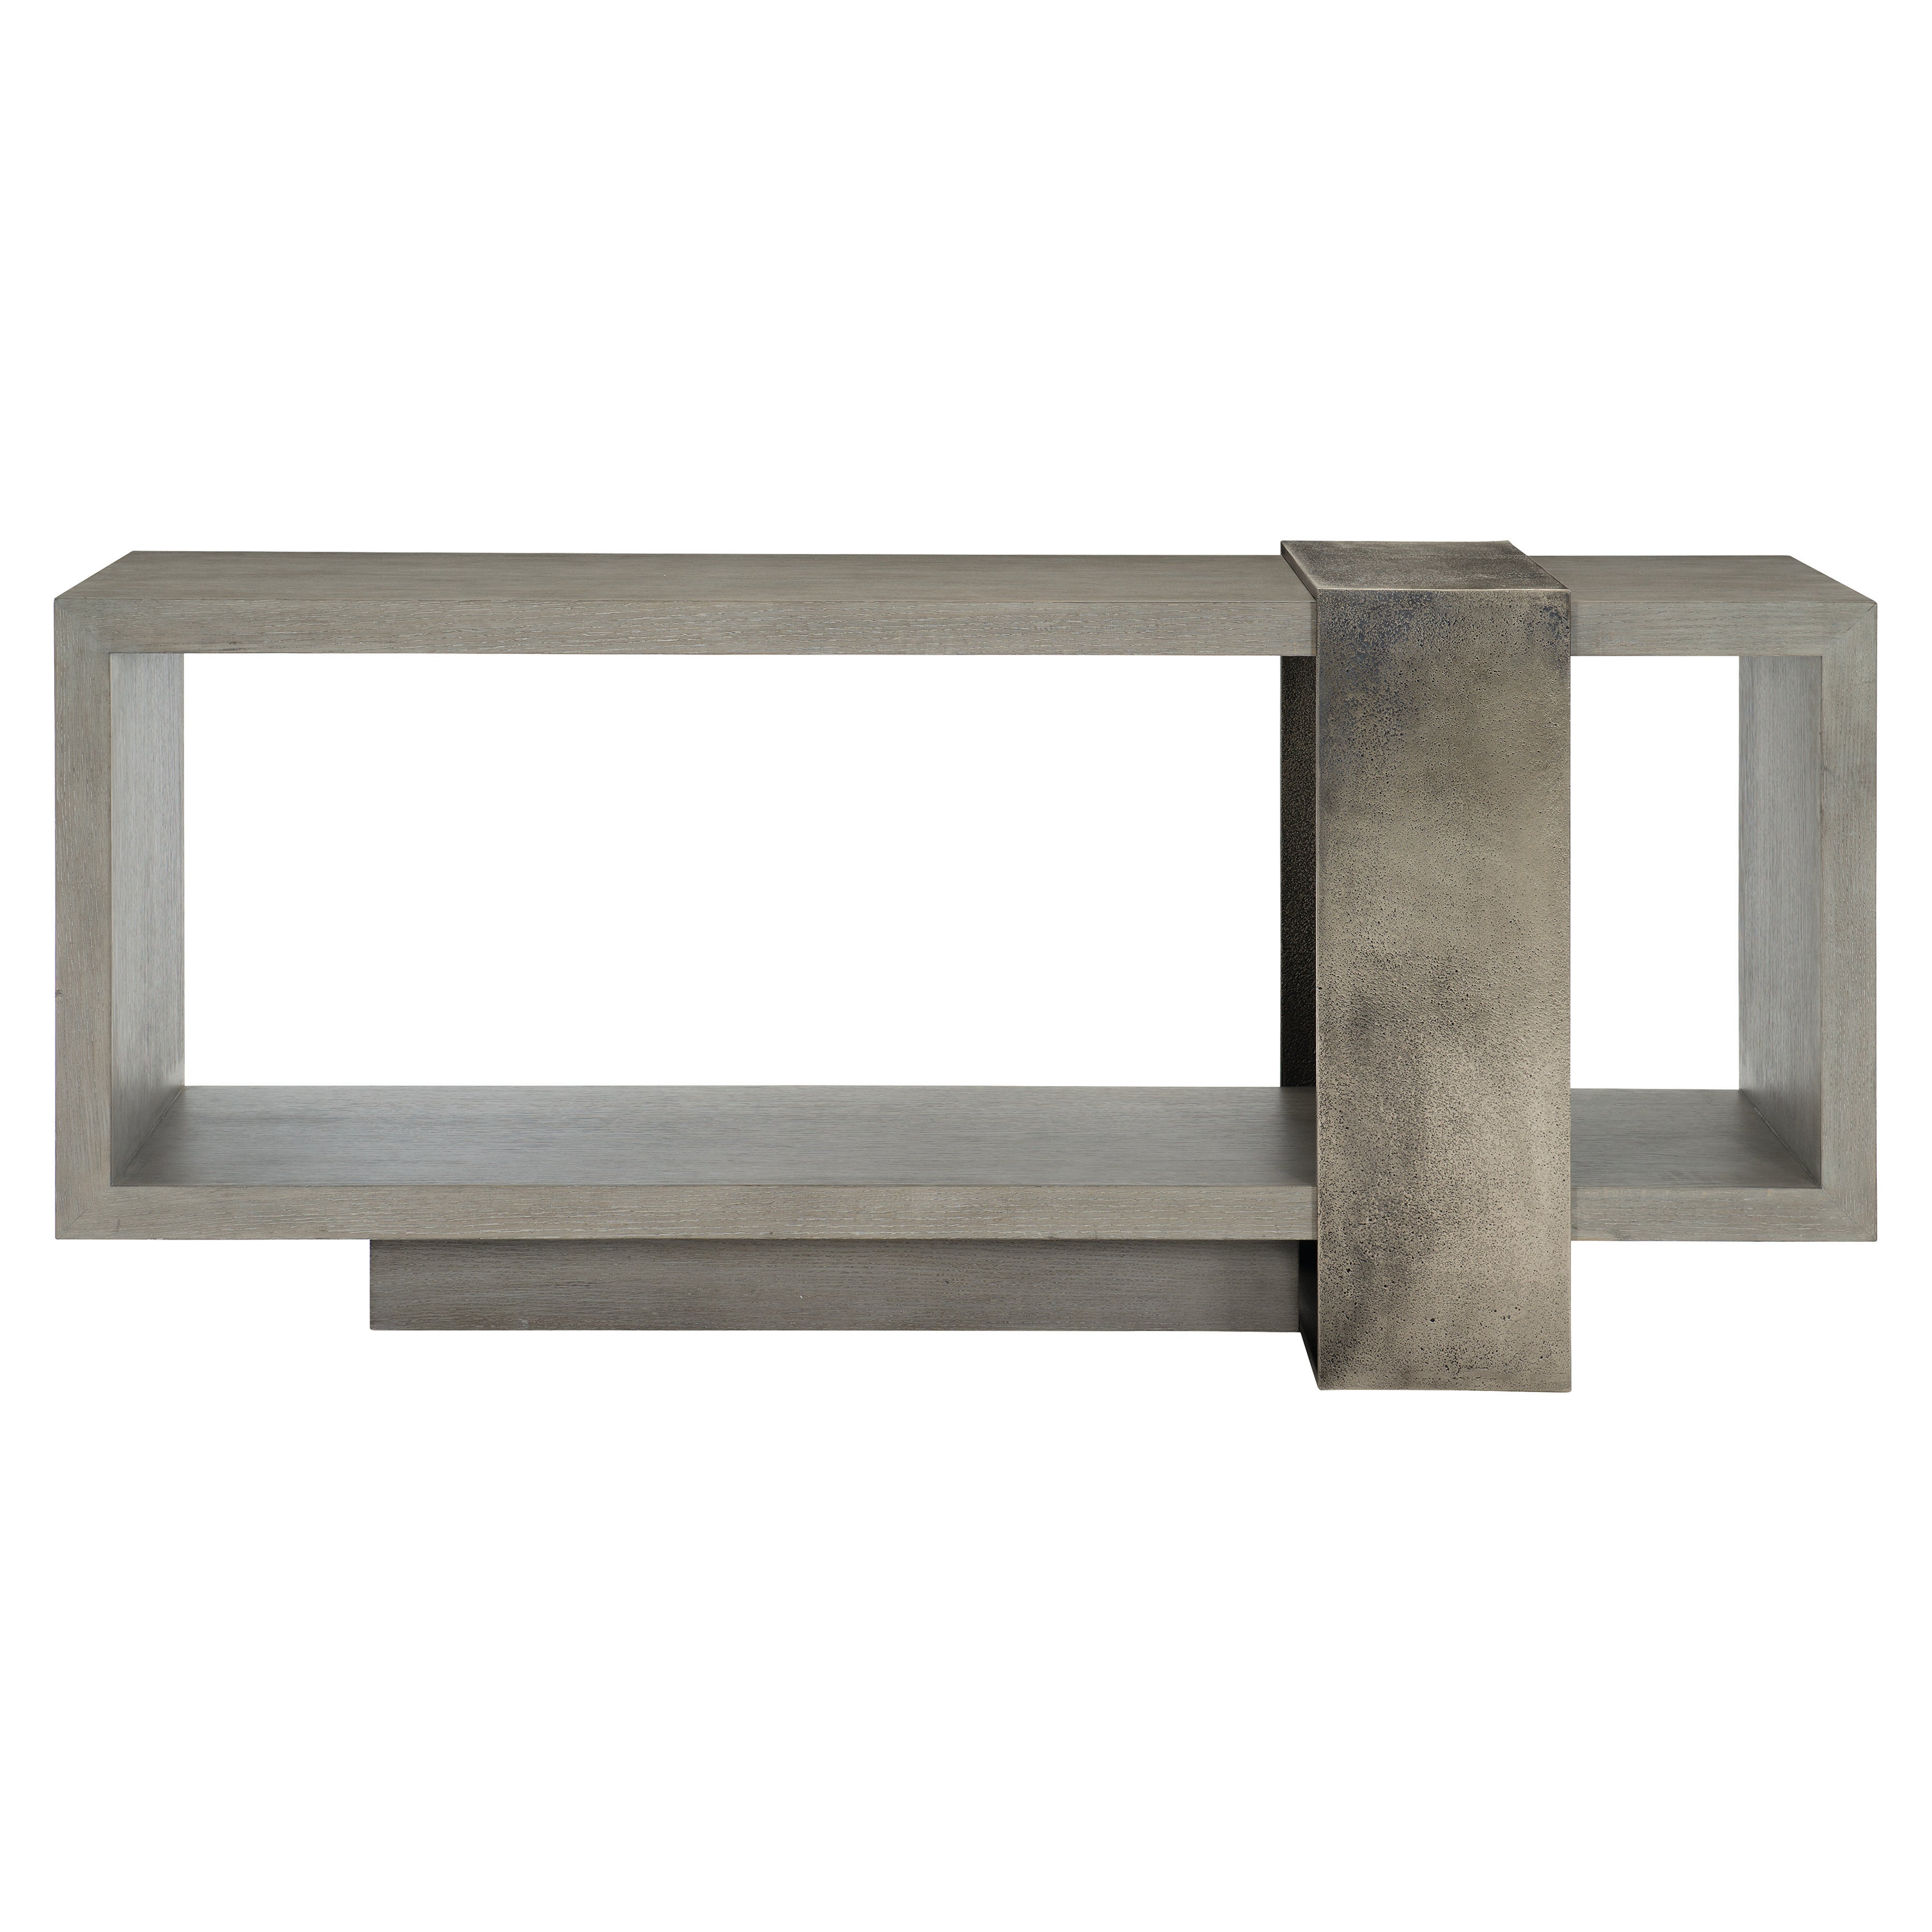 Linea Console Table in Cerused Greige Finish